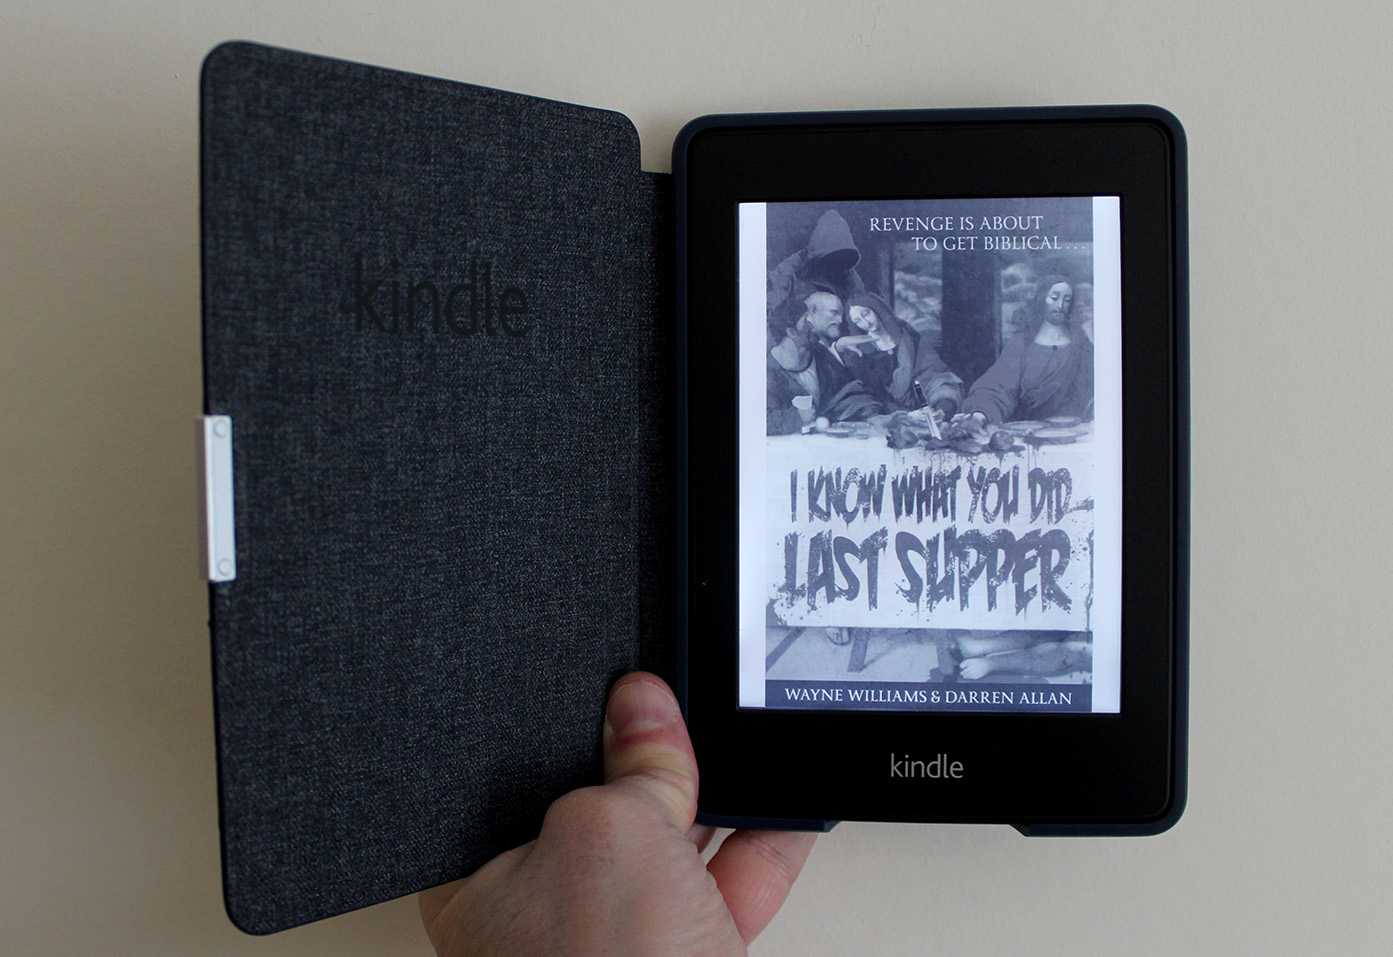 Kindle Paperwhite (2013) e-reader review: 2013 Paperwhite is